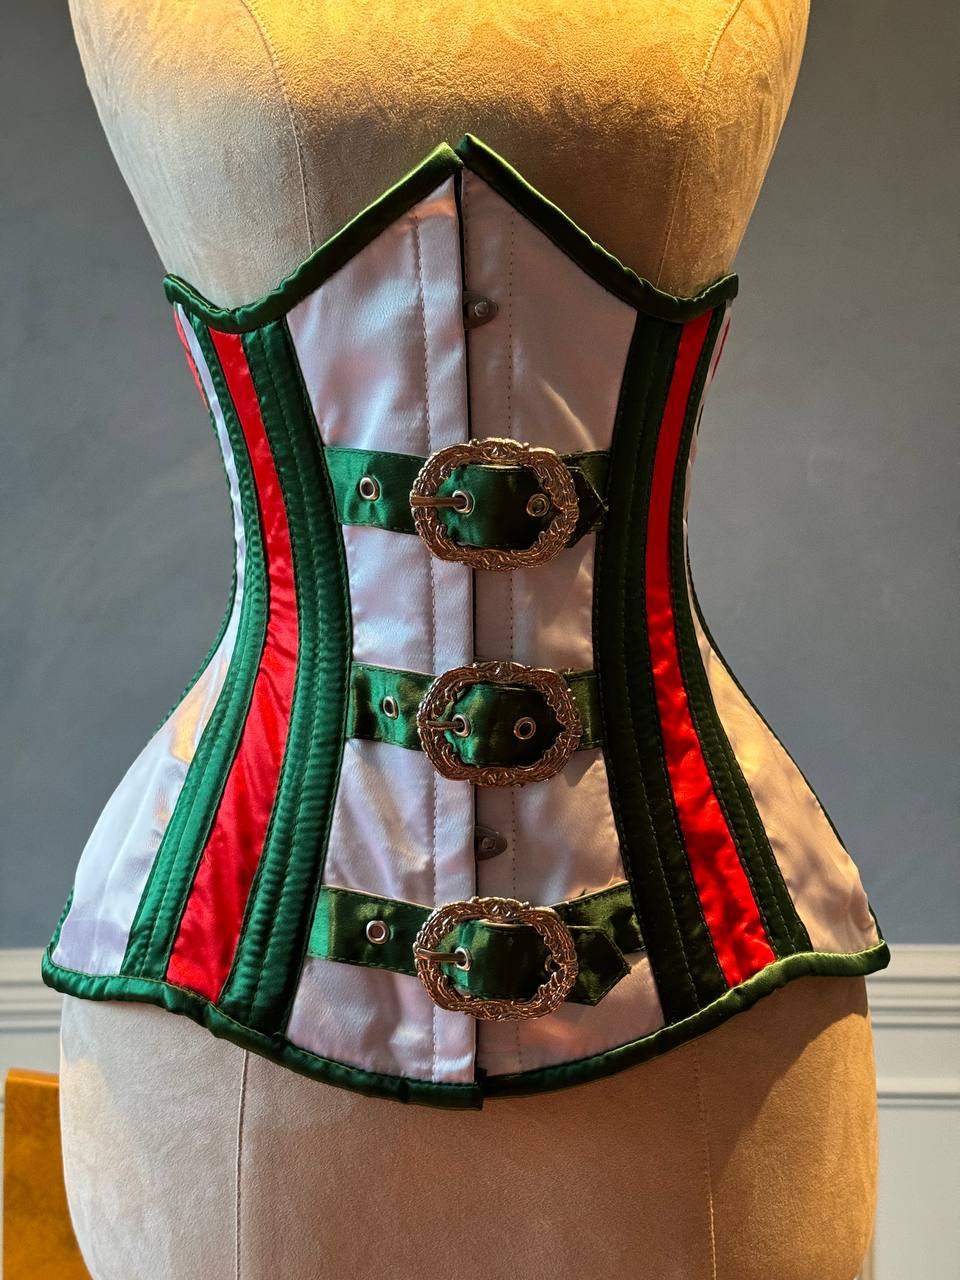 Underbust red and green satin in Santa style with steampunk